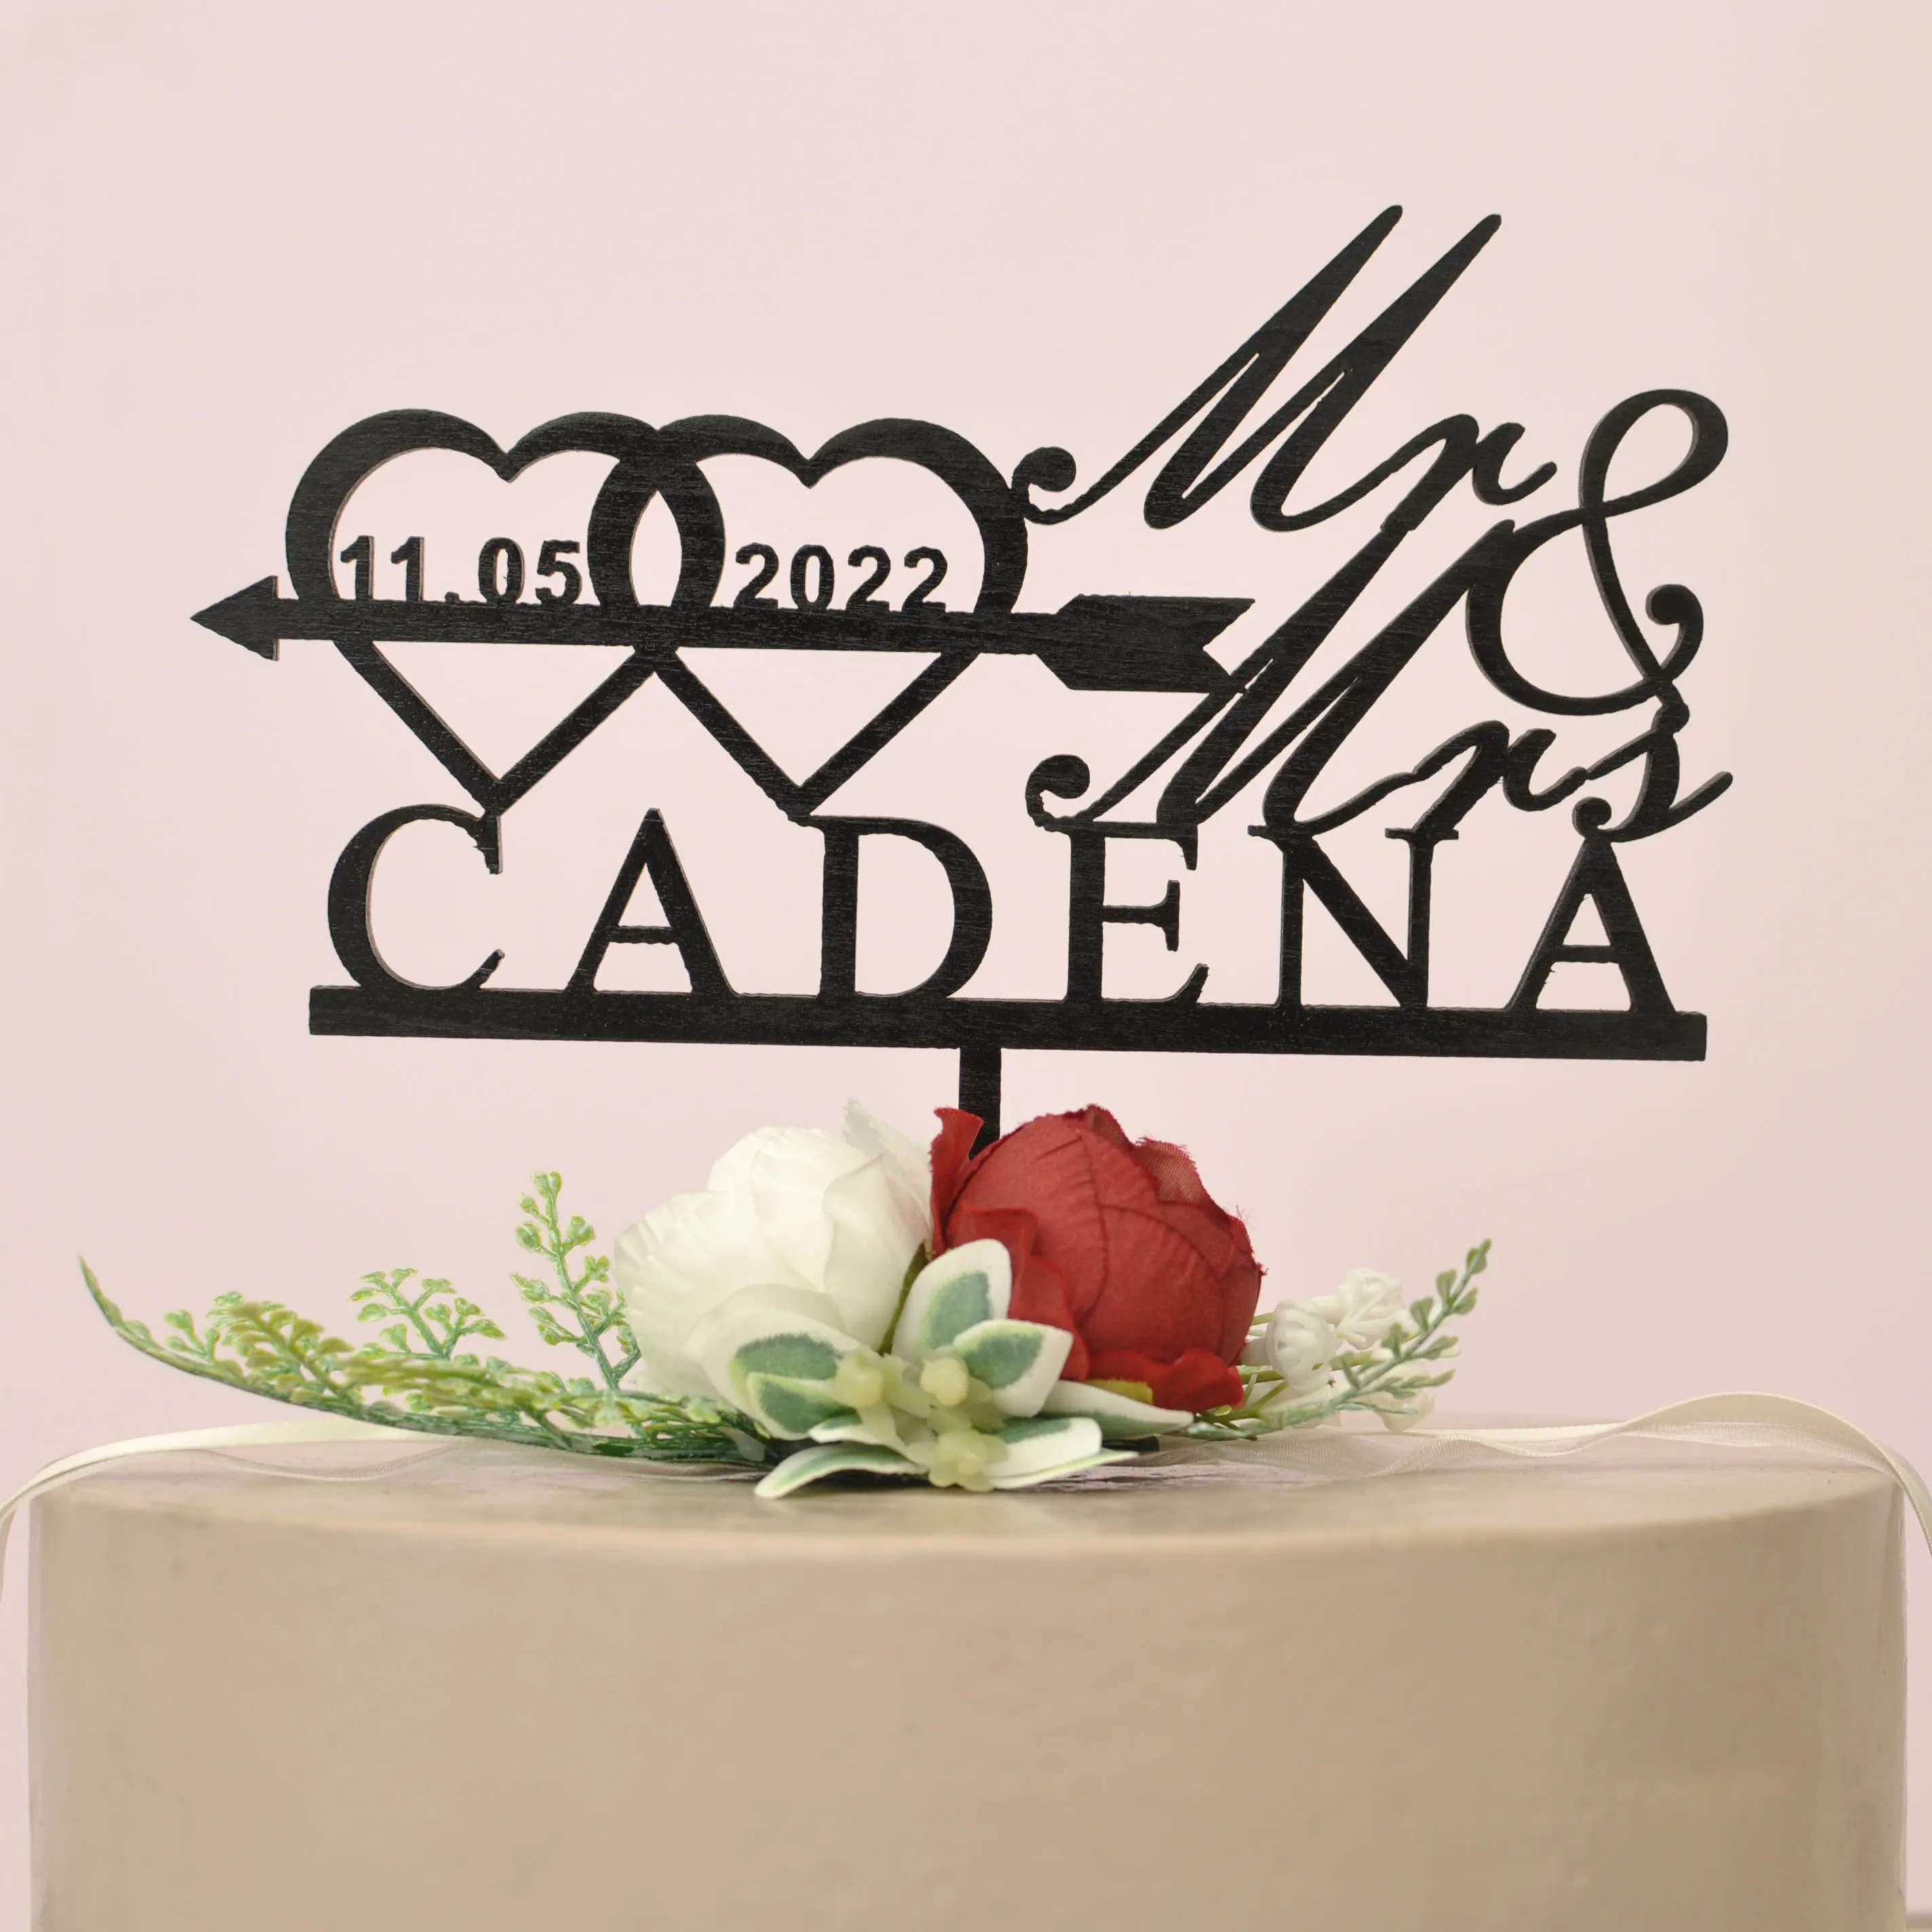 

Customized Wedding Cake Topper,Groom Bride Gifts ,Mr&Mrs Anniversary, graduation ceremony,Doctor's Day,Children's Firs